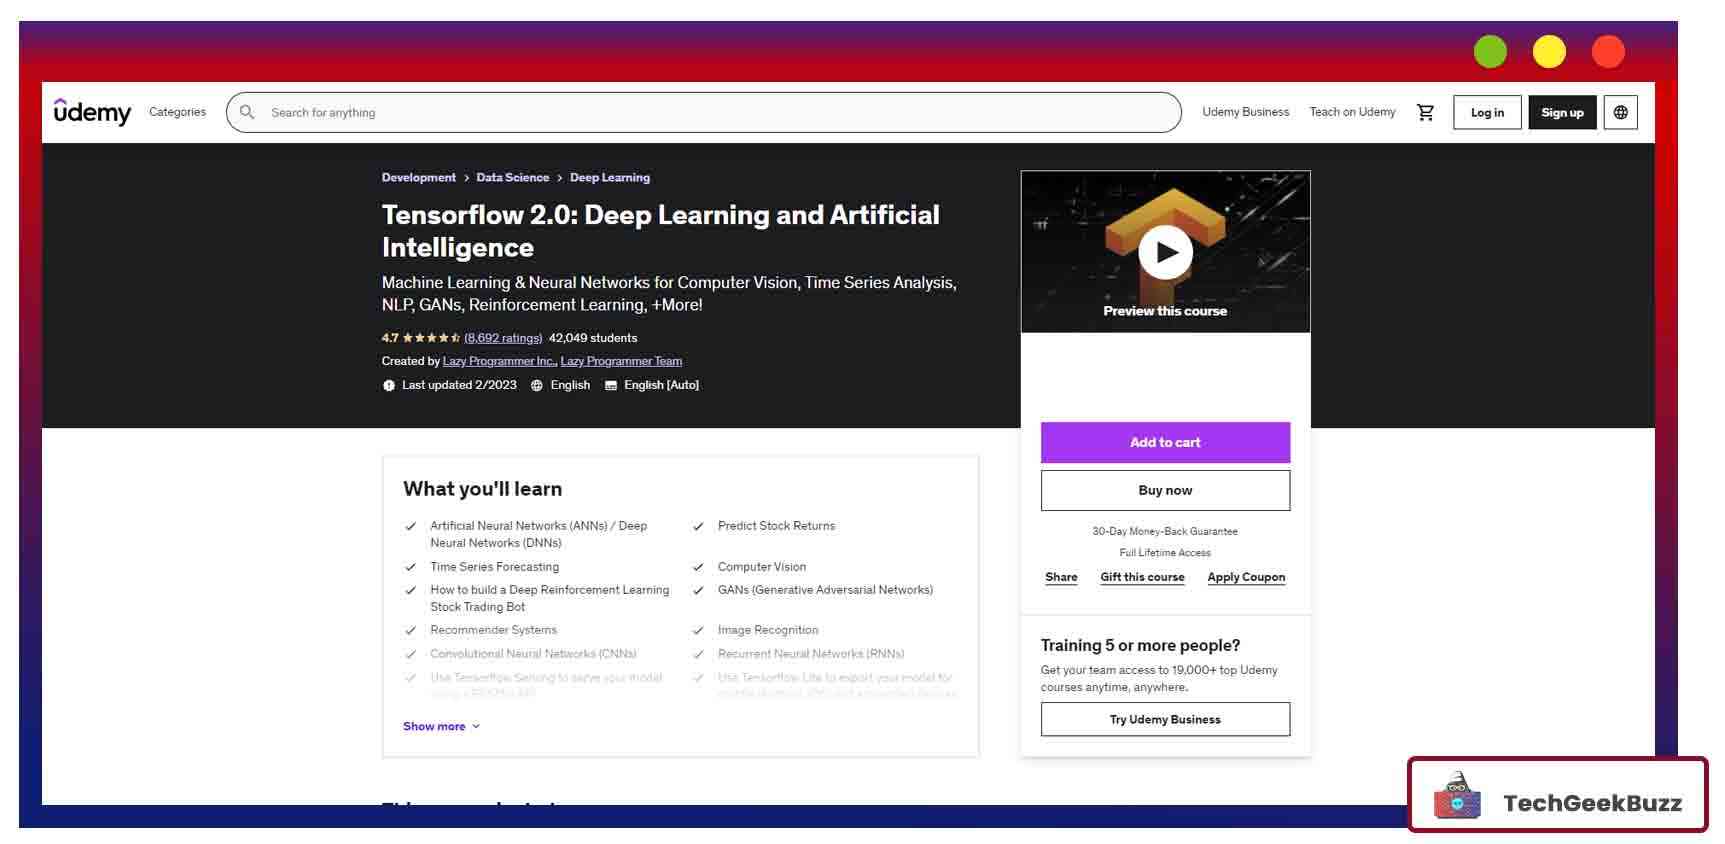  Tensorflow 2.0: Deep Learning and Artificial Intelligence